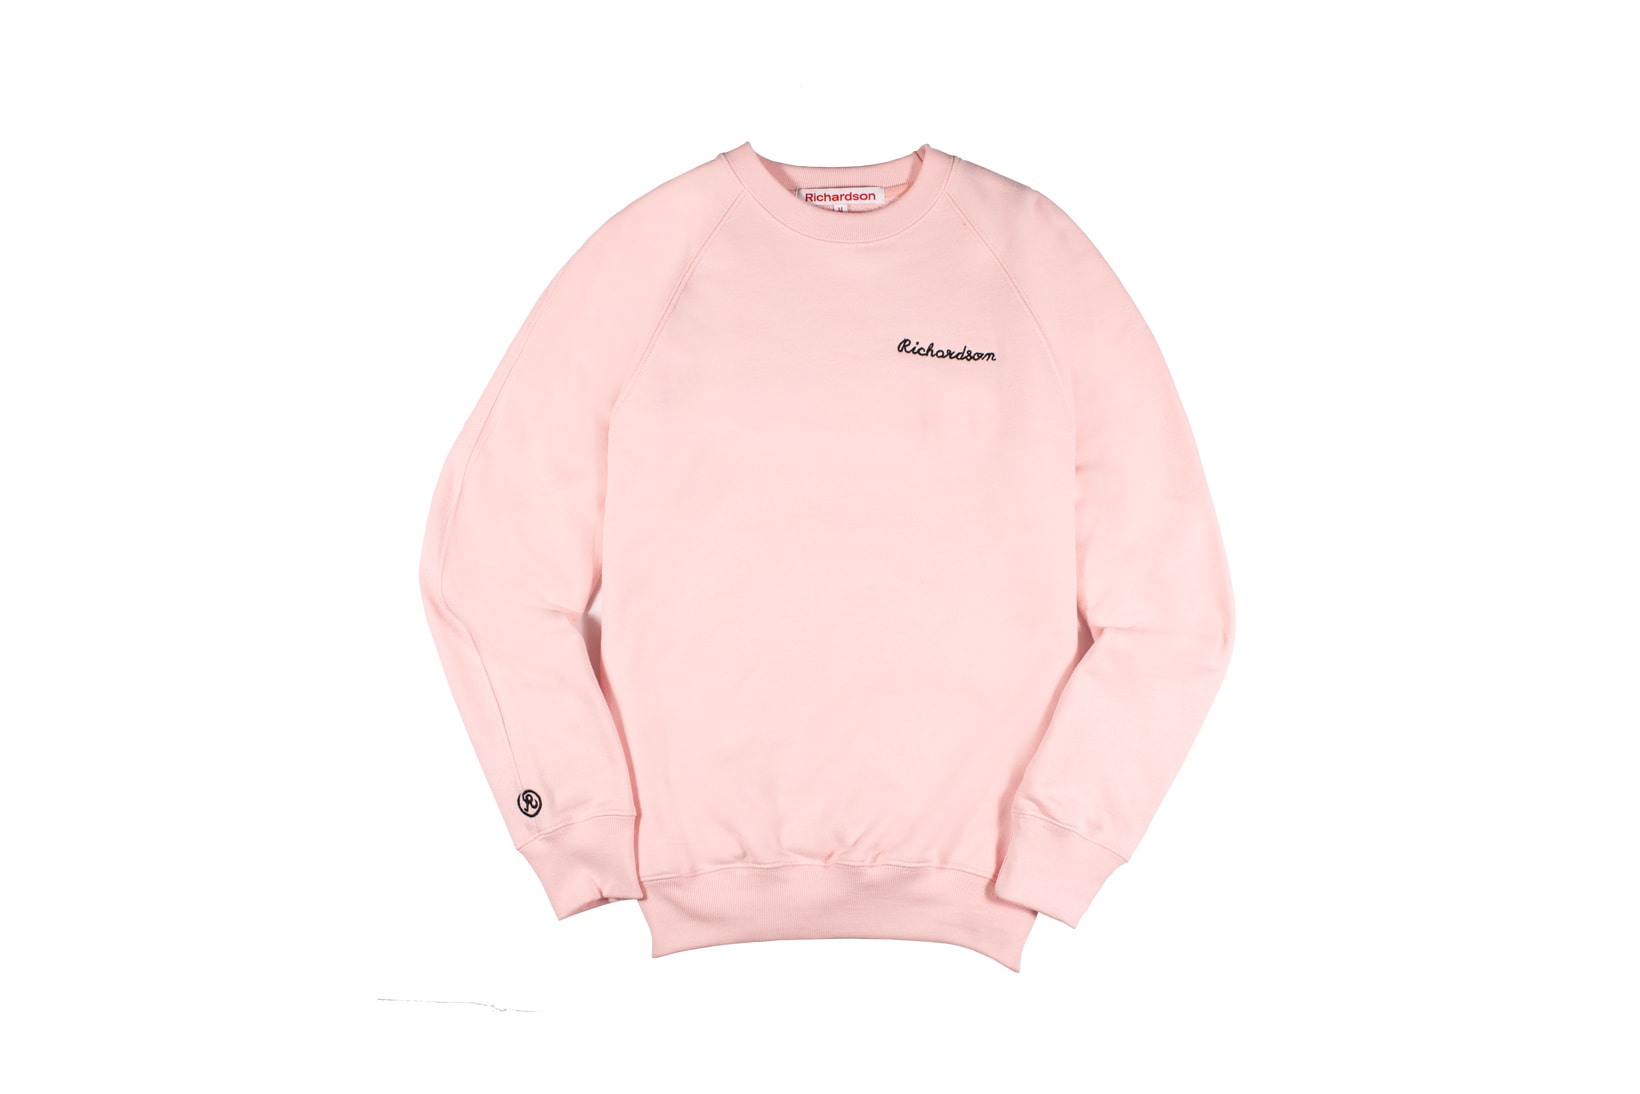 Richardson Spring/Summer 2018 Collection Crew Sweater Pink